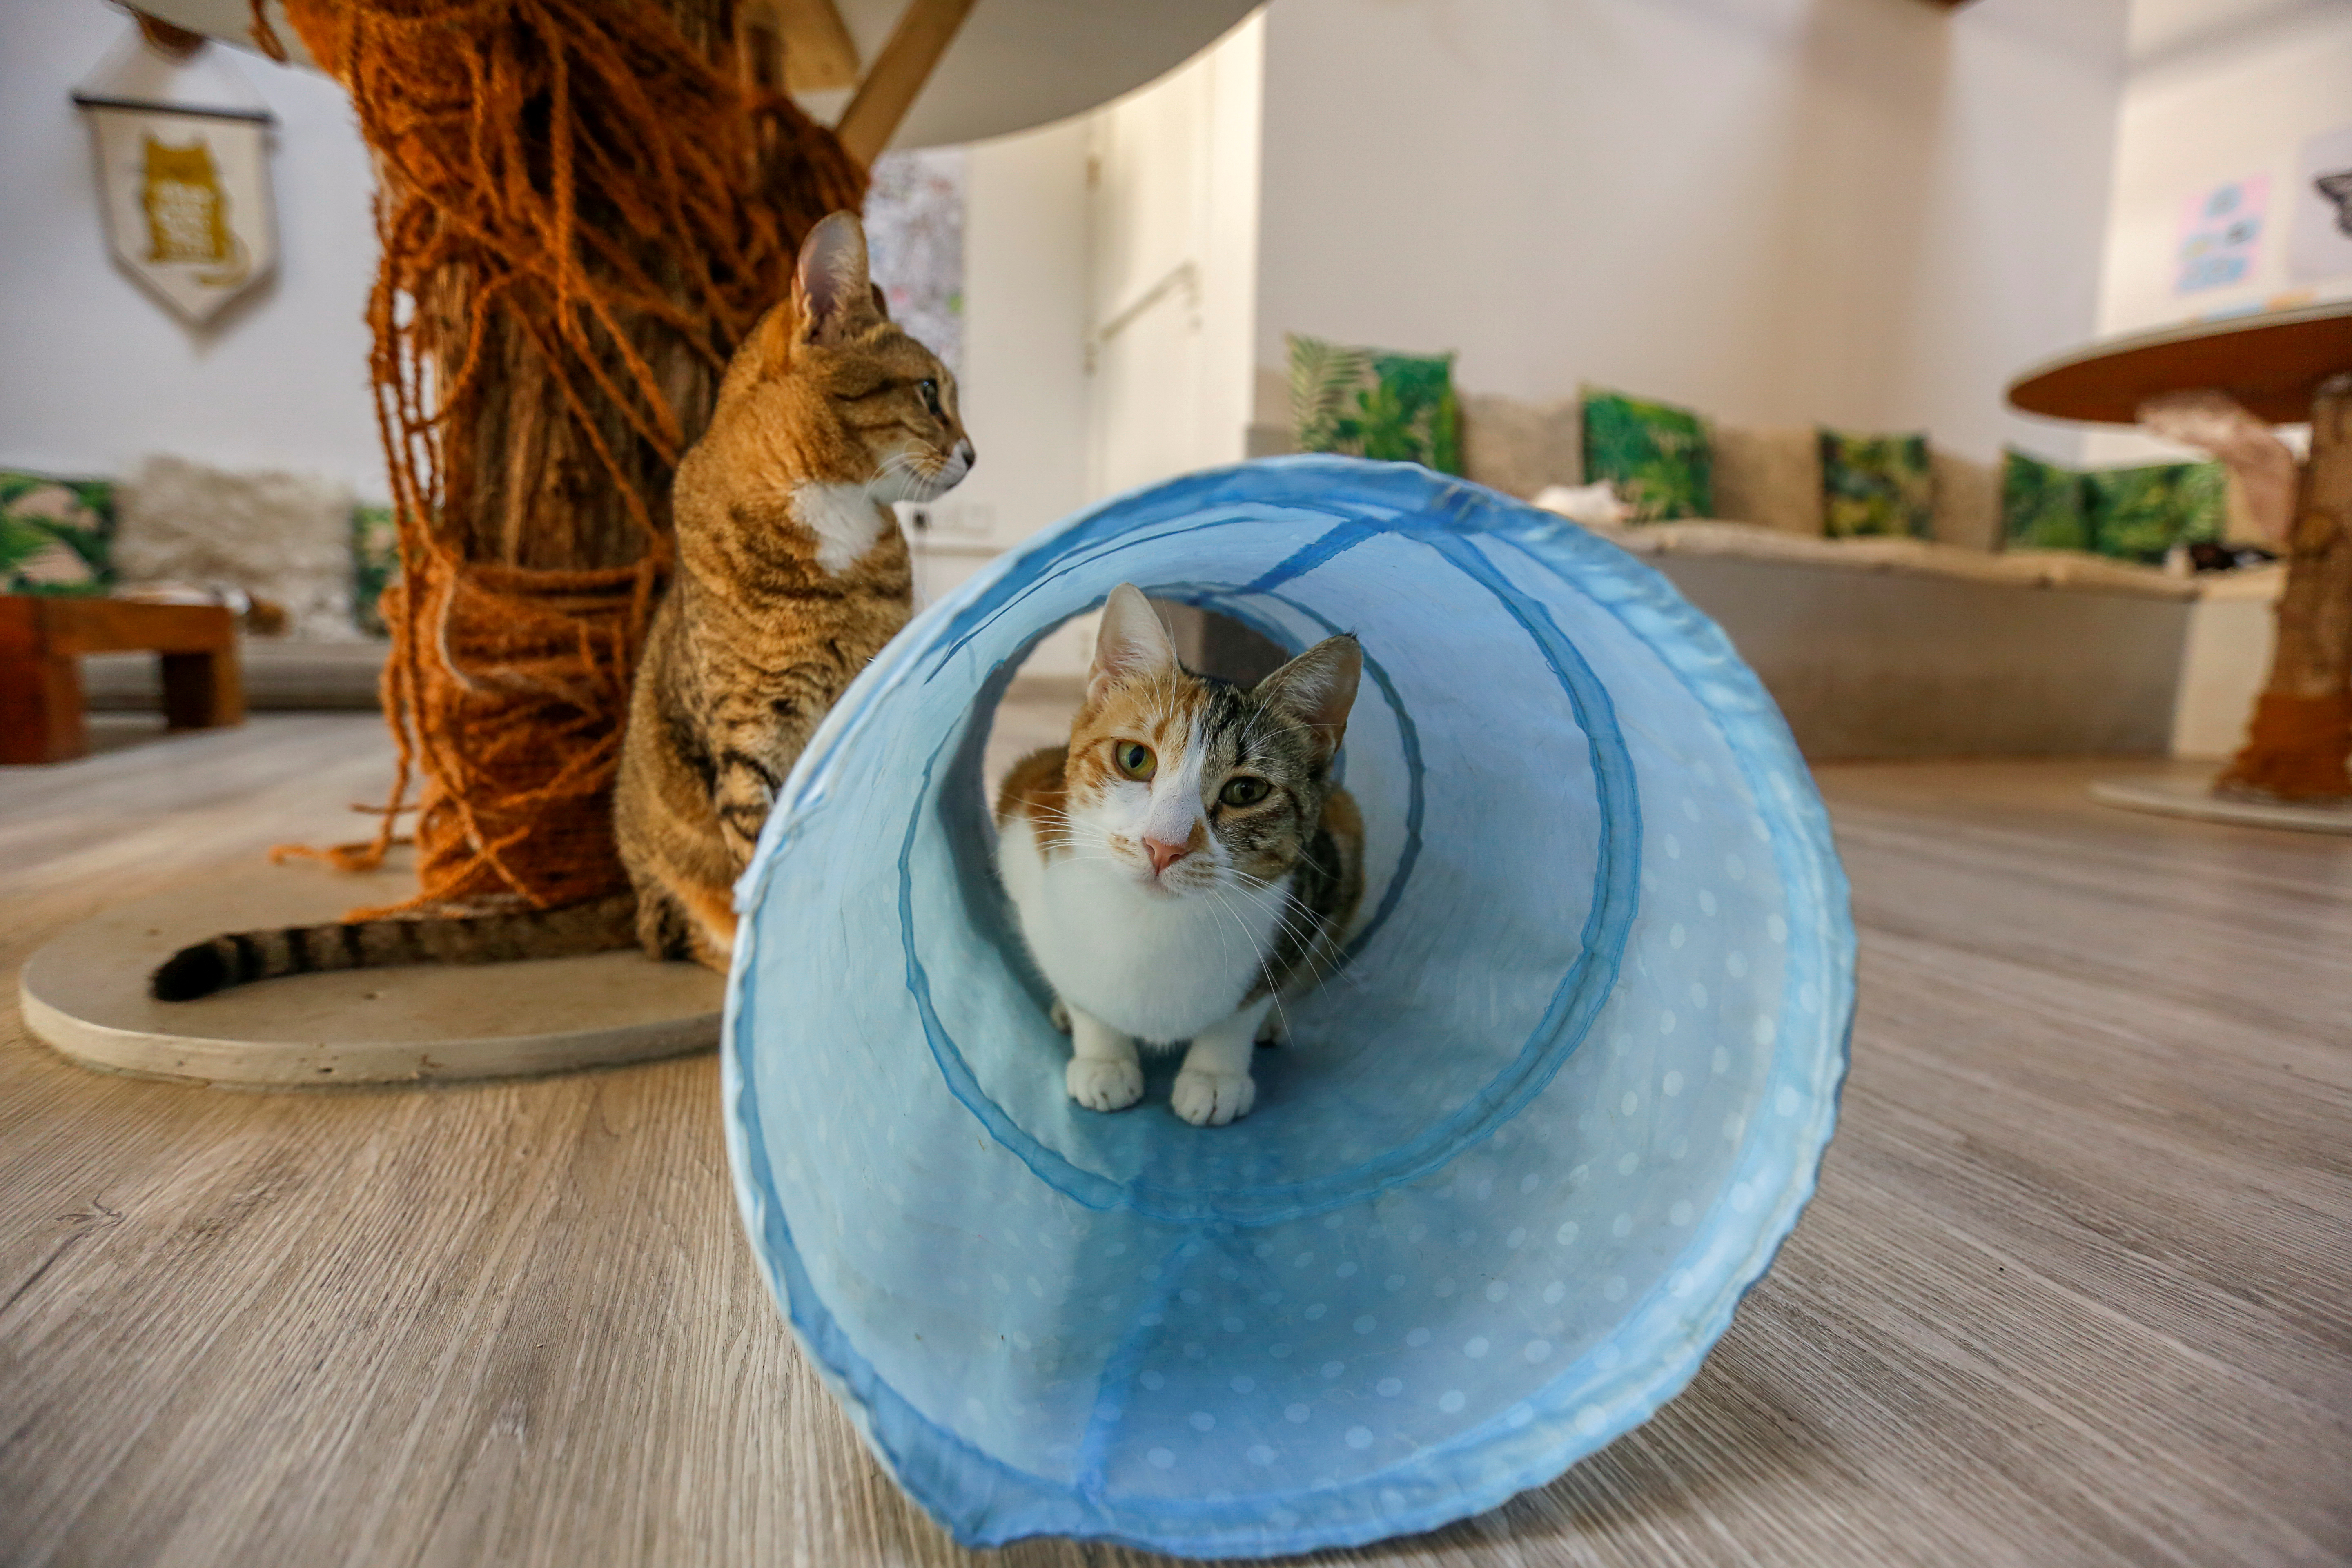 Cat Cafe offers therapy to human and adoption to cats in Dubai